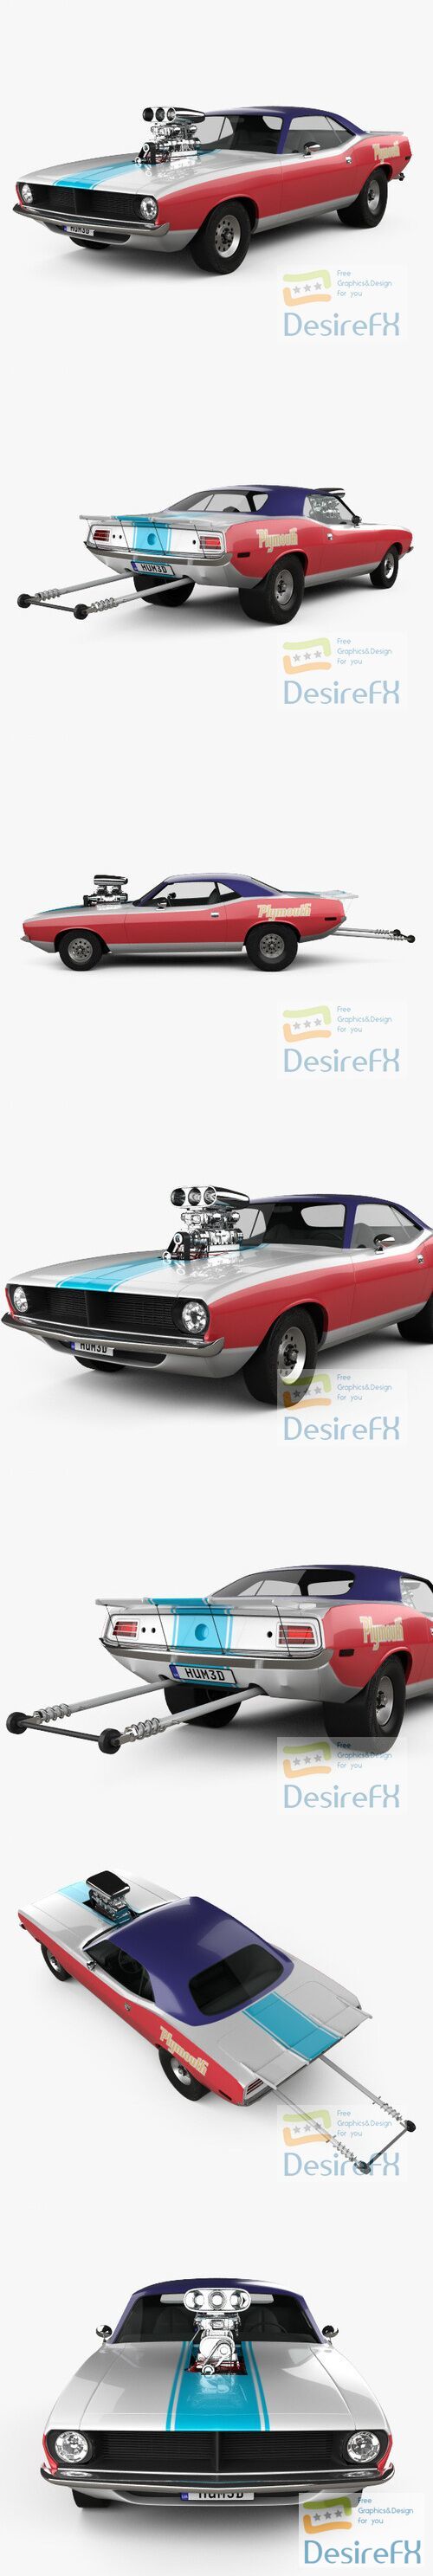 Plymouth Barracuda Dragster 1974 3D Model